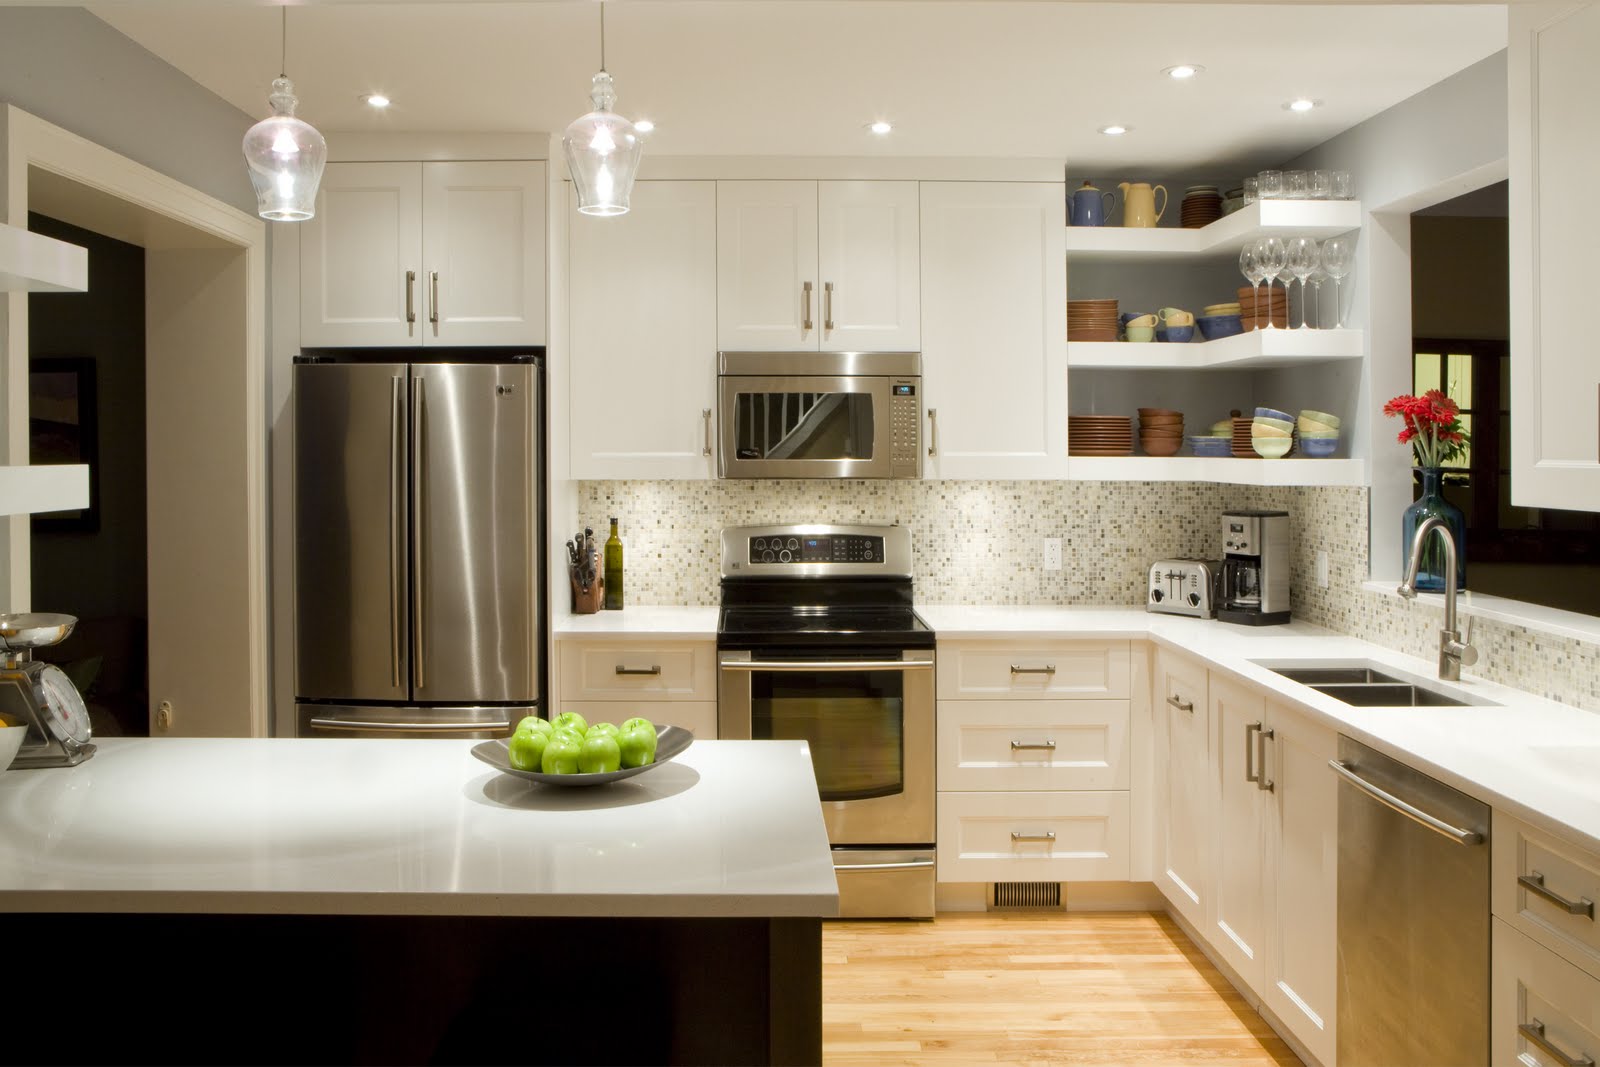 Picture Of Kitchen Cabinets